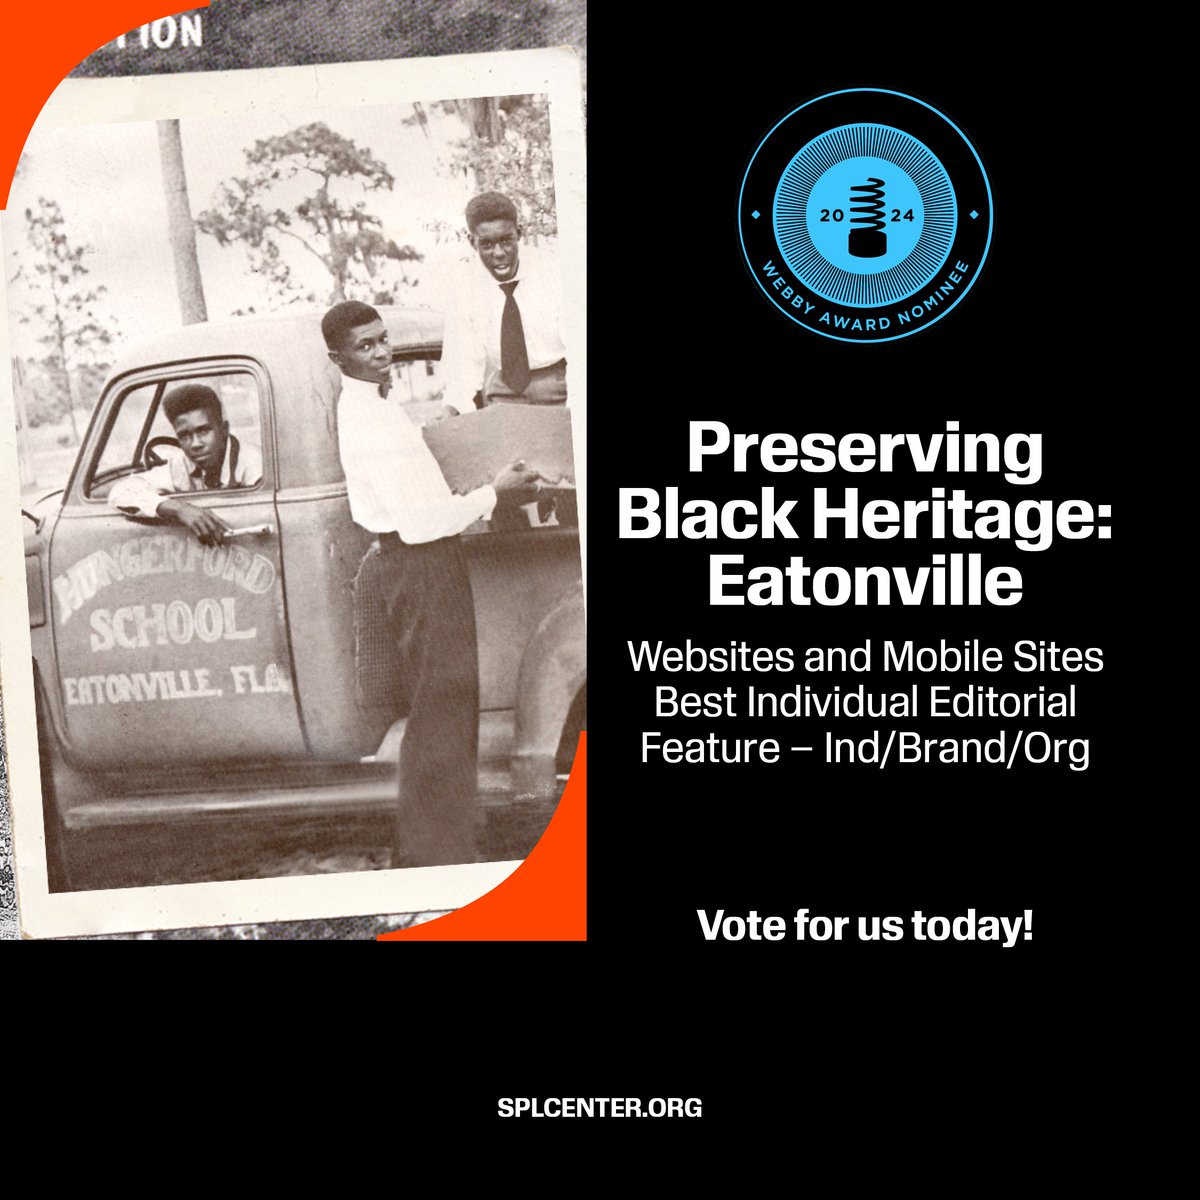 The SPLC is in the running for @TheWebbyAwards! Support us by voting for our story, Preserving Black Heritage: Eatonville, to win the People’s Voice Award. 🗳️ Voting closes on April 18: bit.ly/3VKZUzG